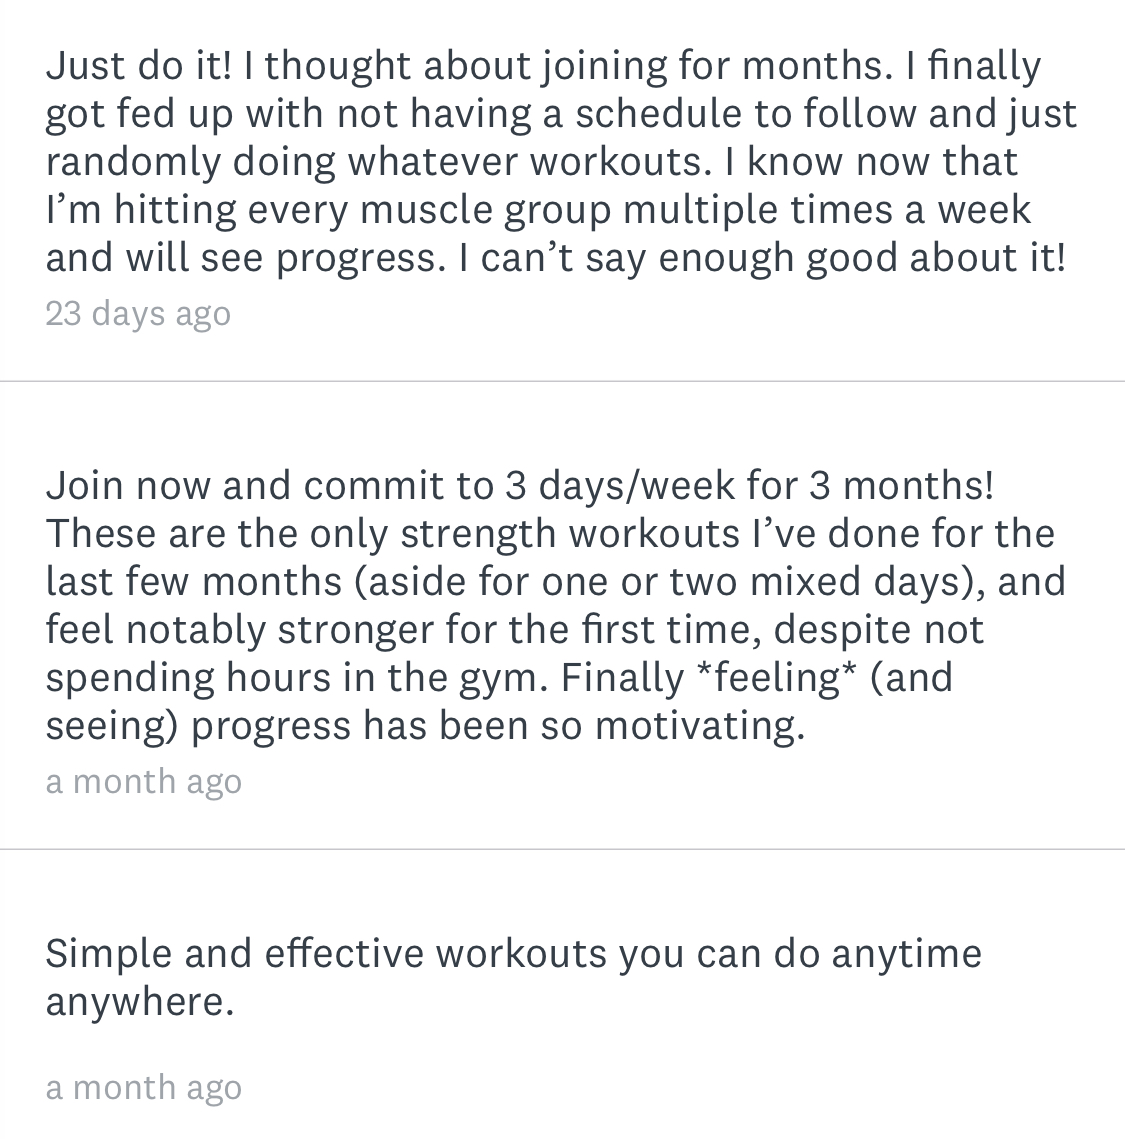 fit team feedback - Friday Faves - The Fitnessista